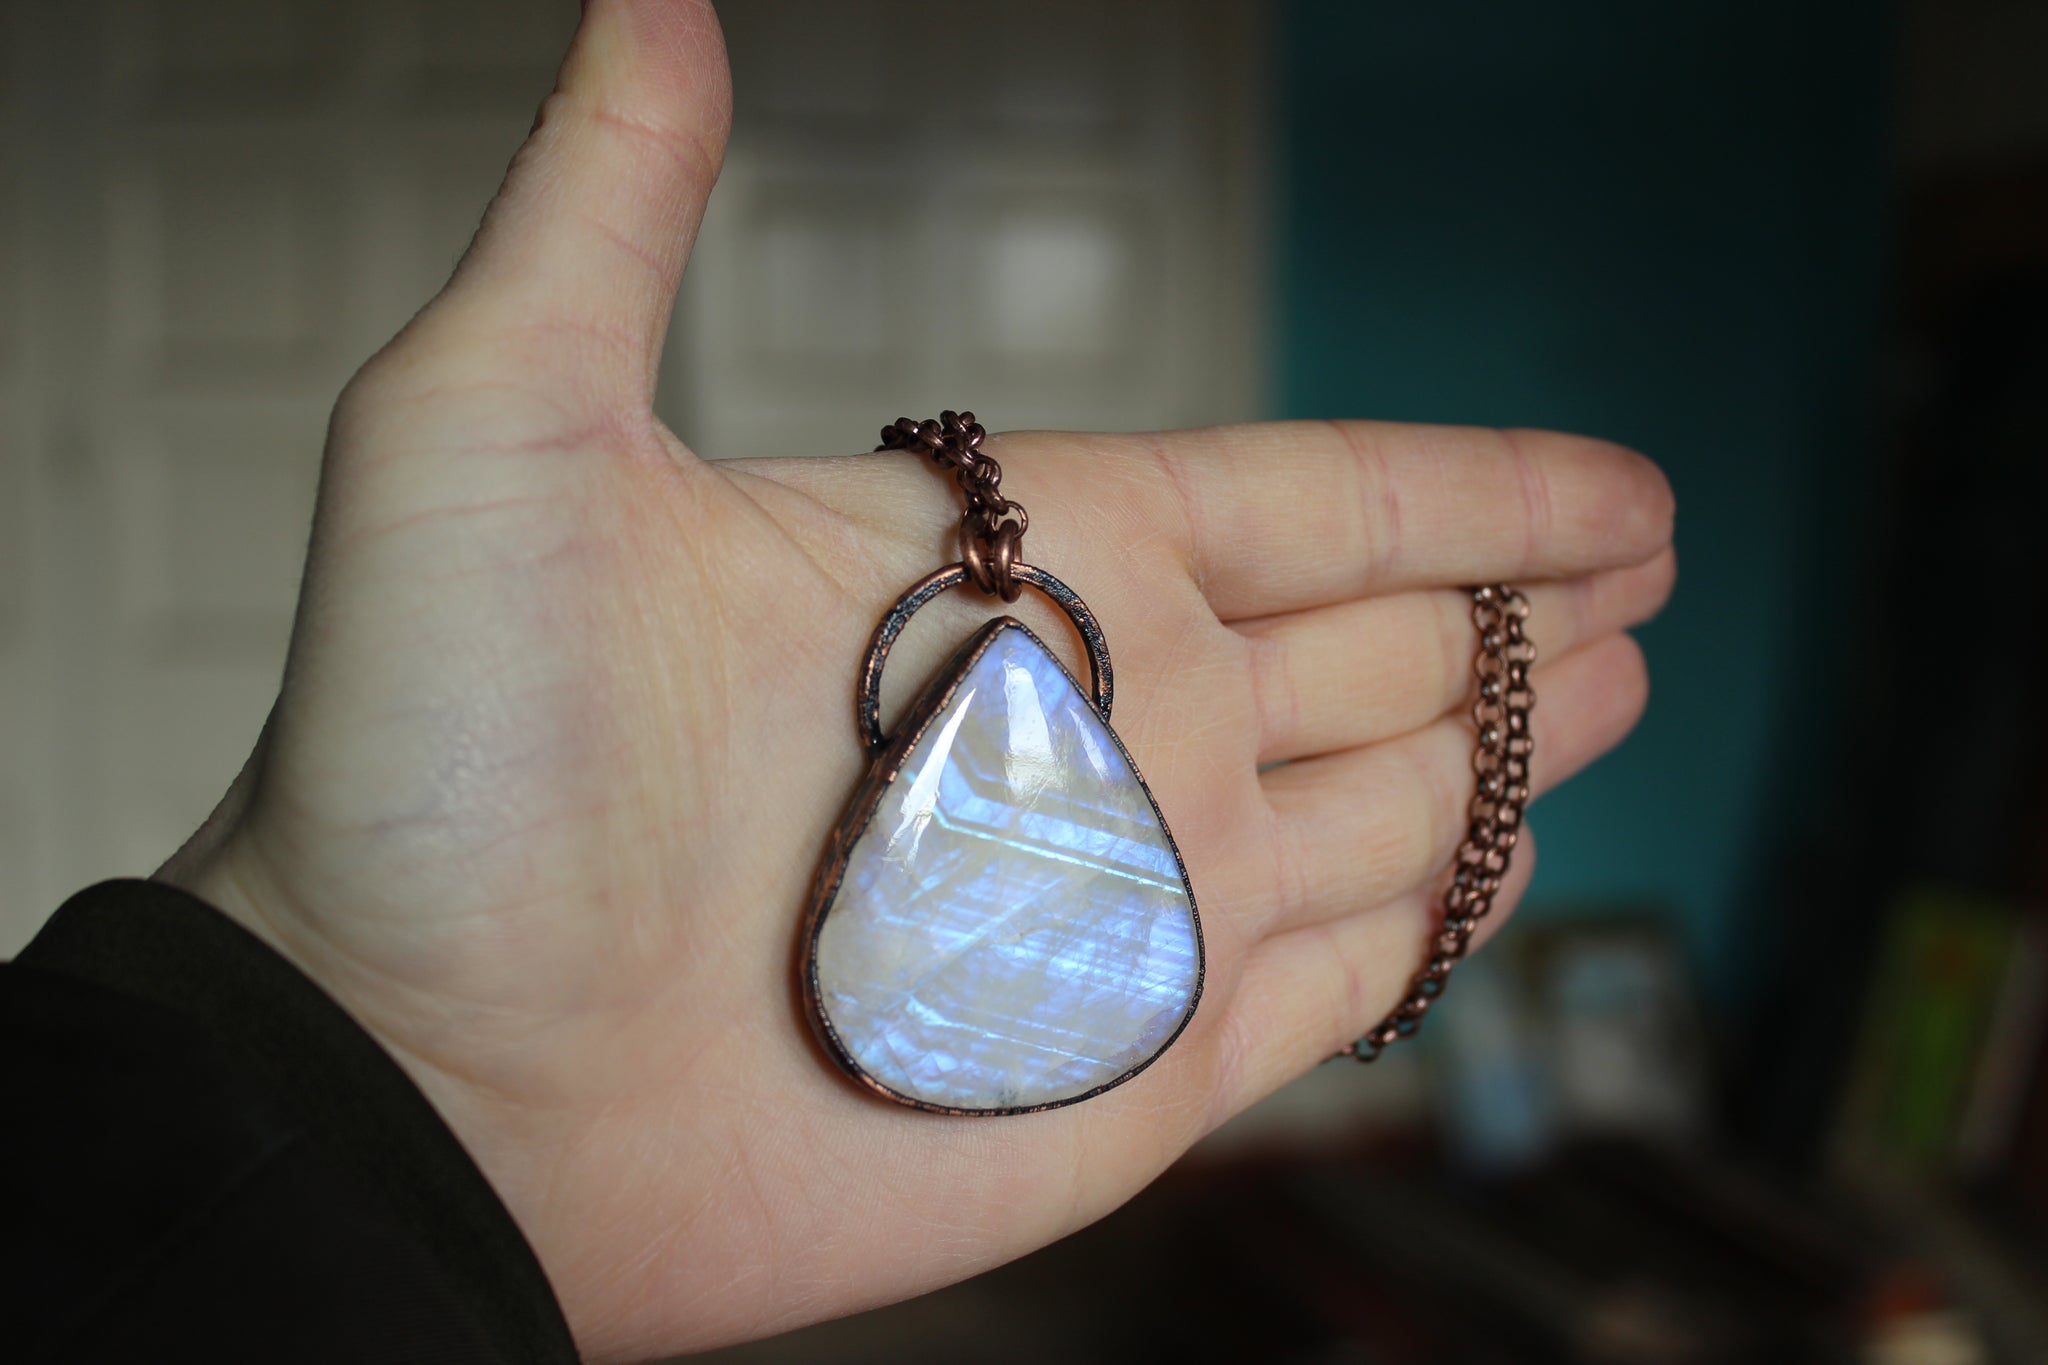 Large Rainbow Moonstone Necklace - a